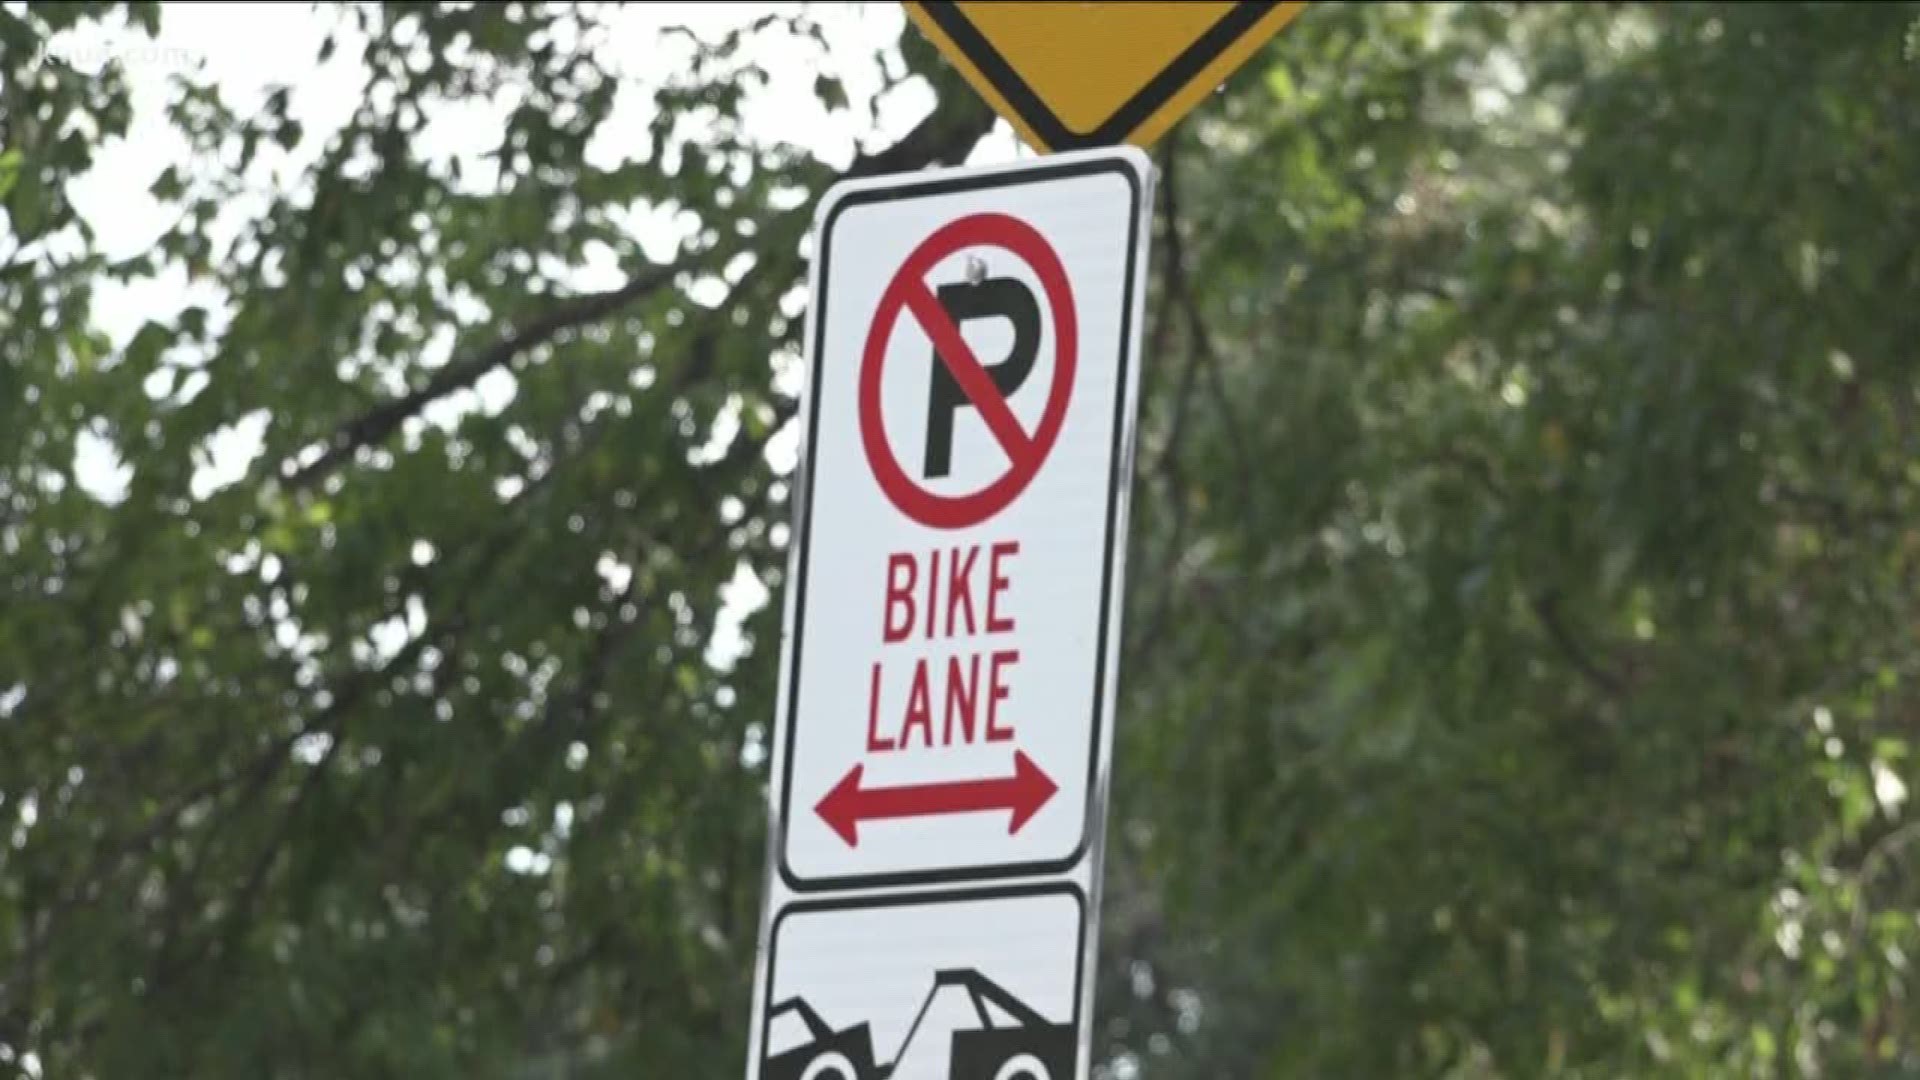 The City of Austin wants to make bike lanes safer on South Congress Avenue.